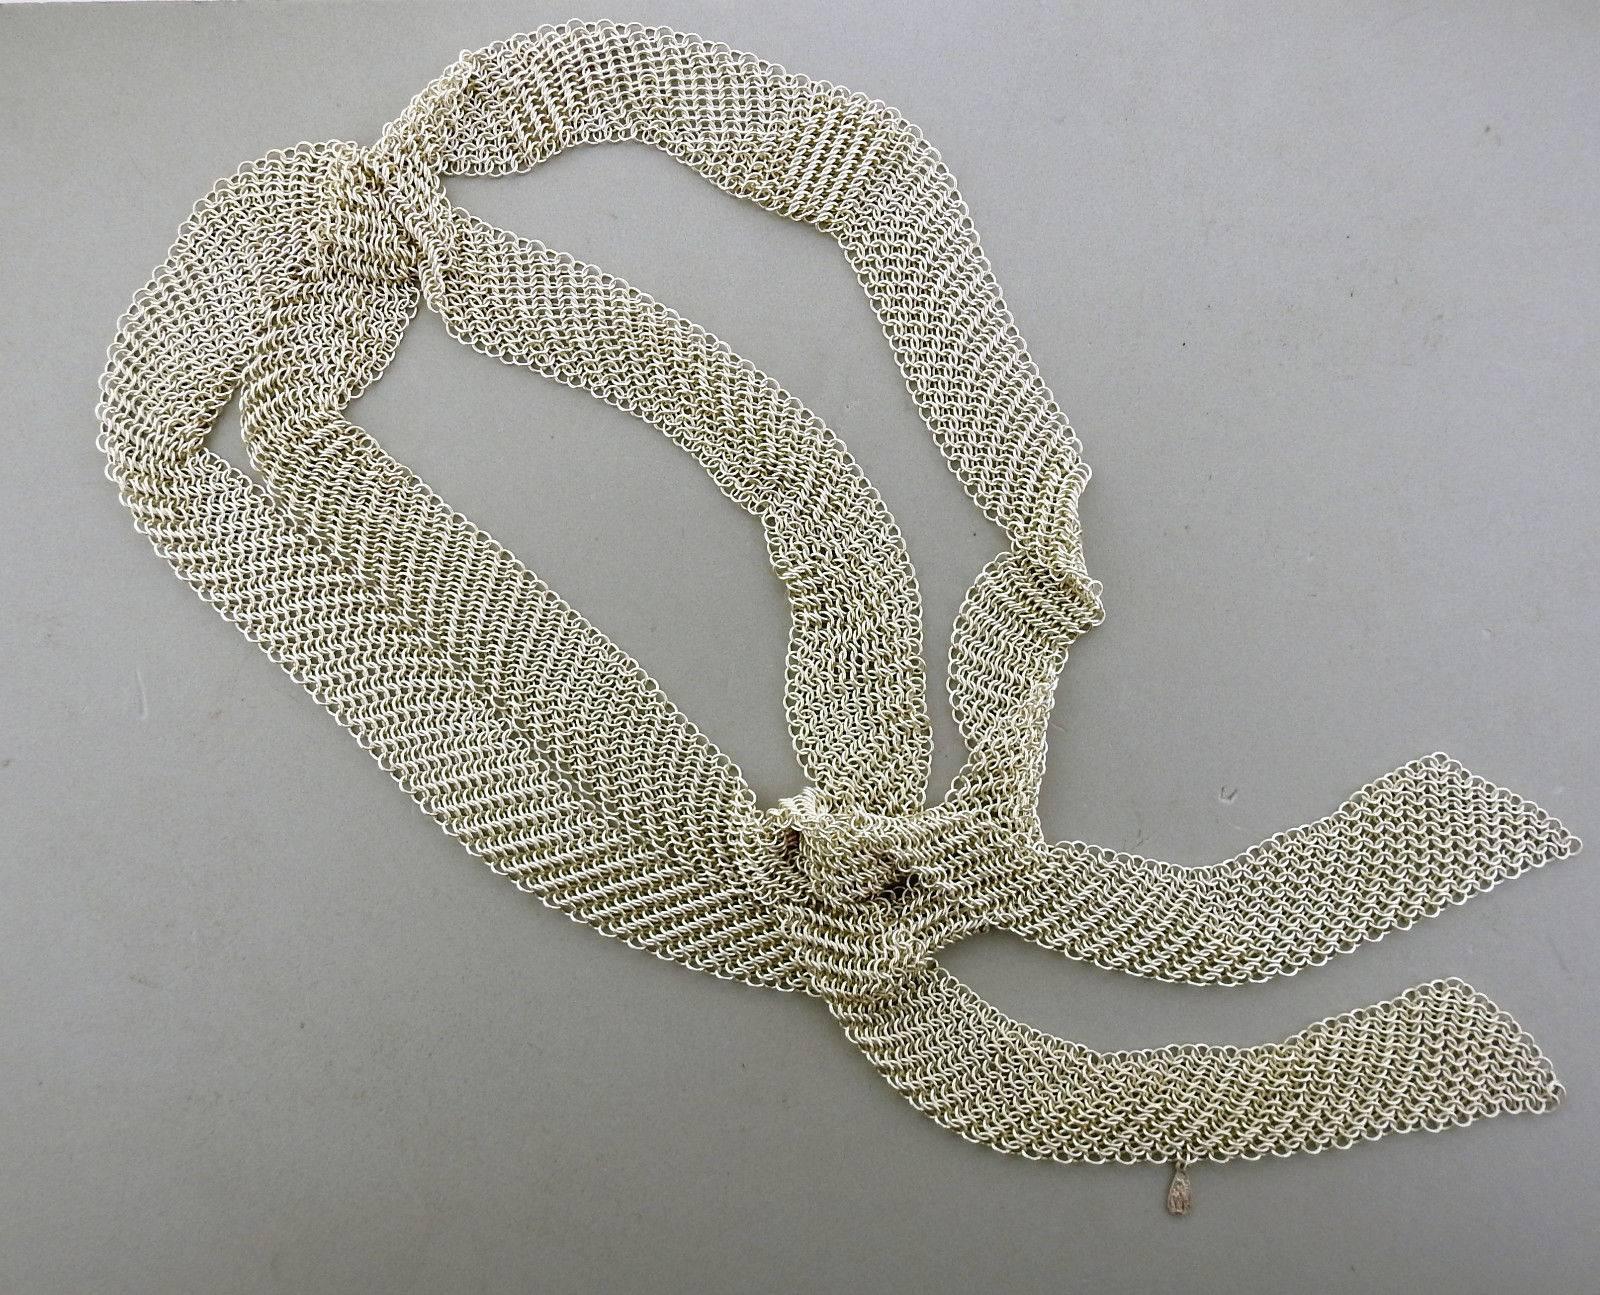 A sterling silver mesh scarf necklace by Elsa Peretti for Tiffany & Co.  The entire length of the necklace is 50